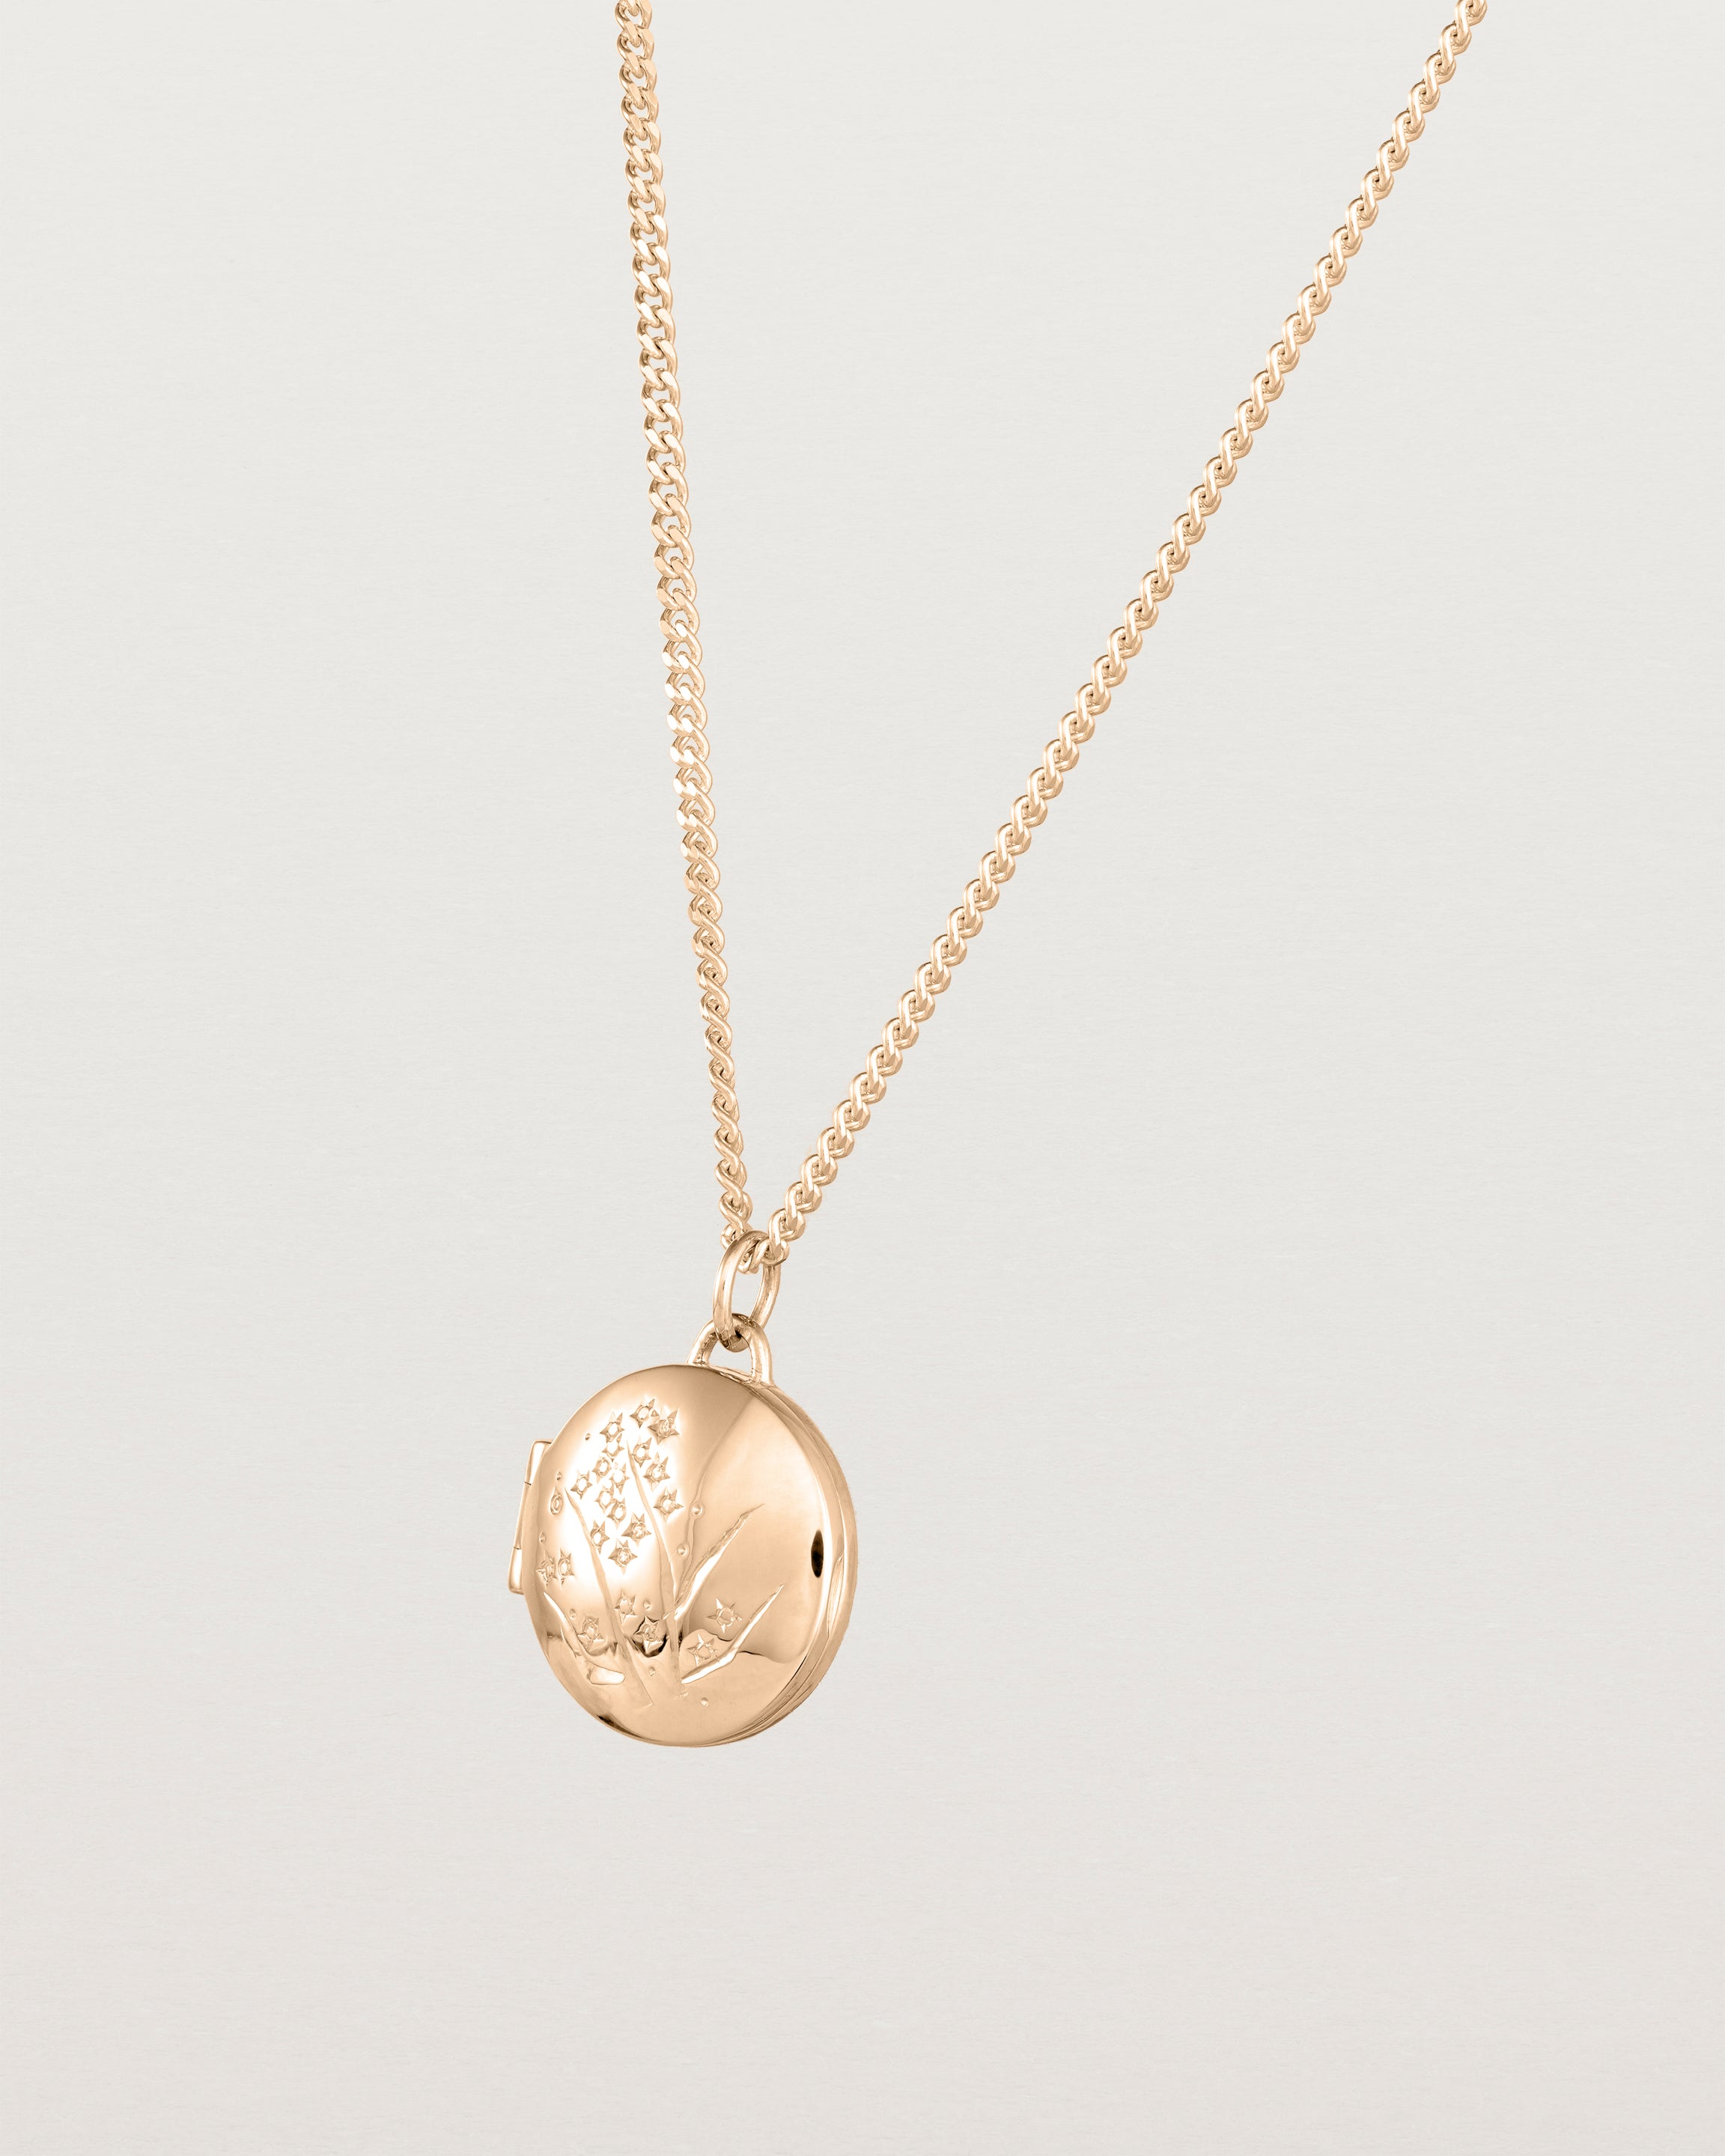 Angled view of the Golden Wattle Locket in rose gold.